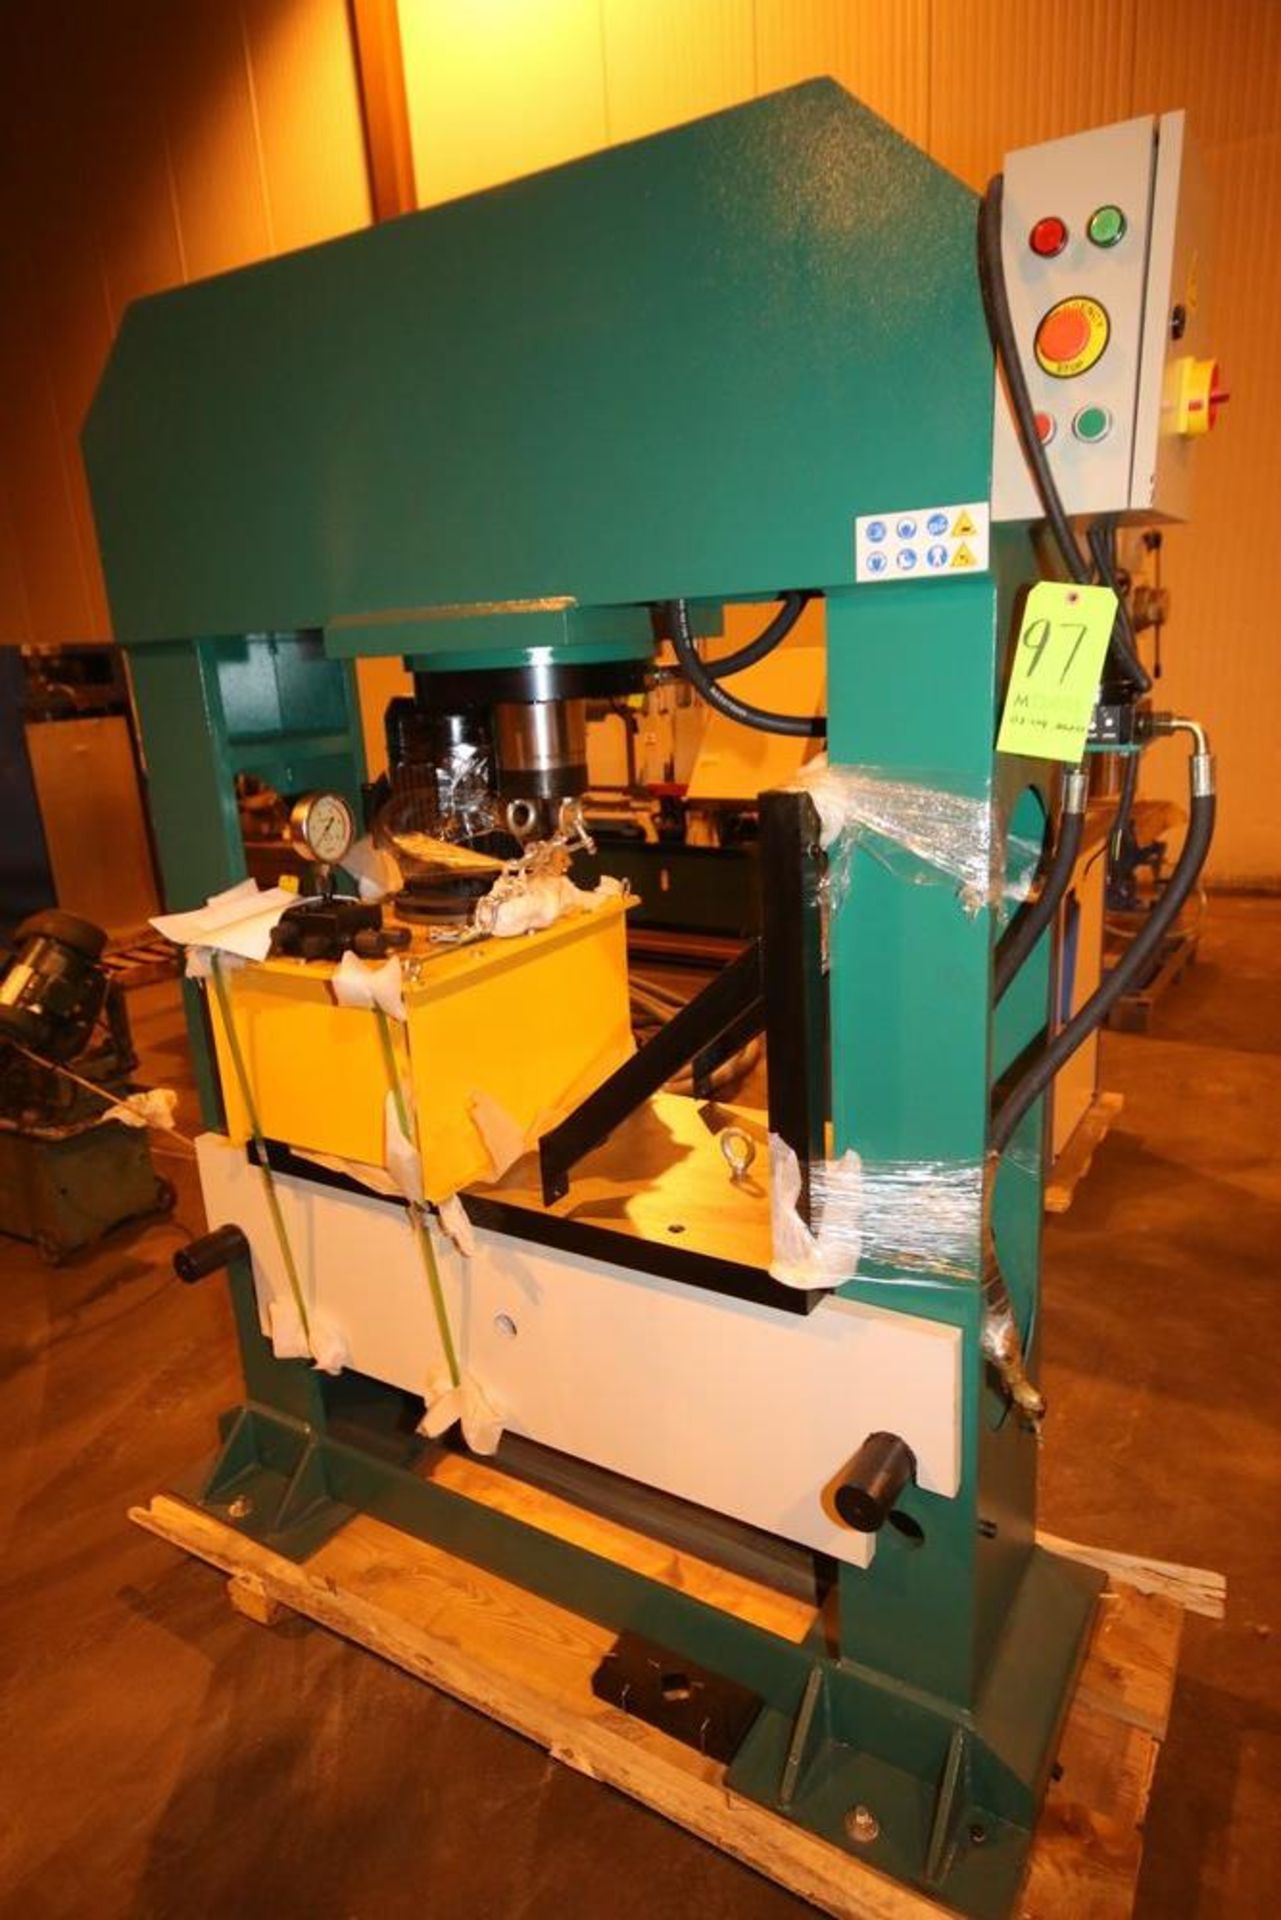 NEW HPB Hydraulic Press/Bending Machine, HP-150 Series, with Hydraulic Pump and Reservoir (LOCATED